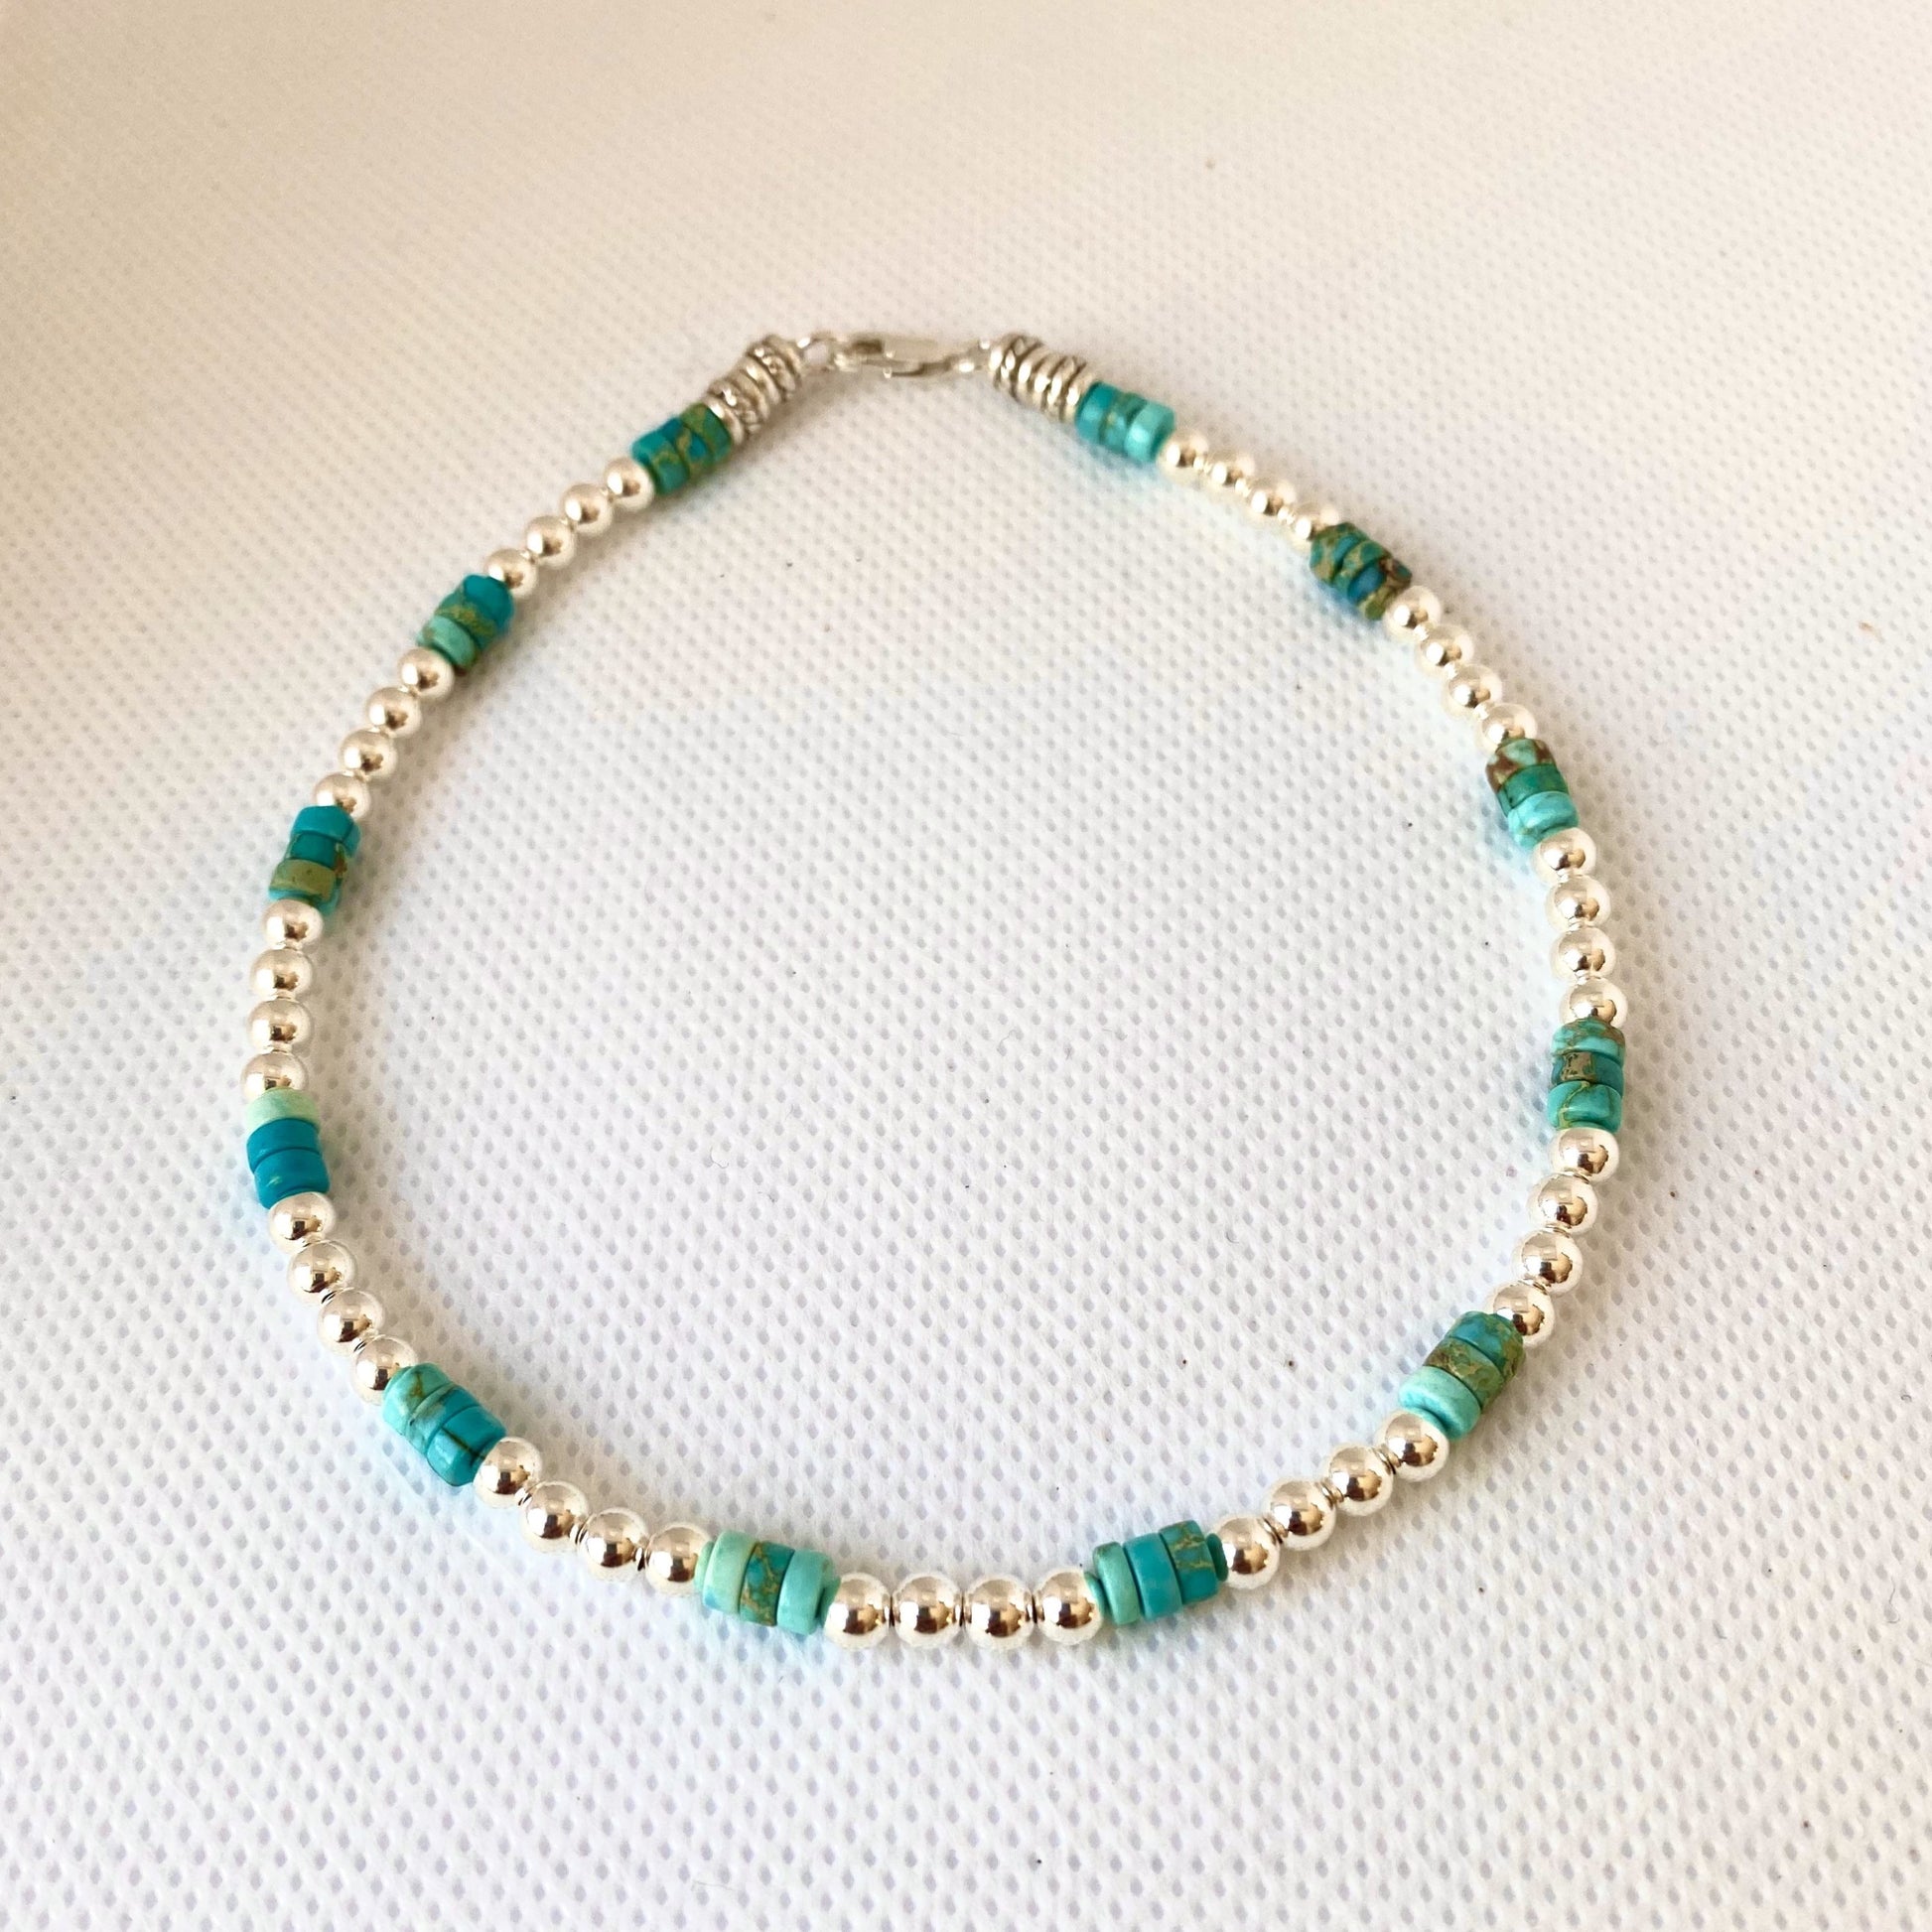 Sea breeze Turquoise Anklet - Love Beach Beads